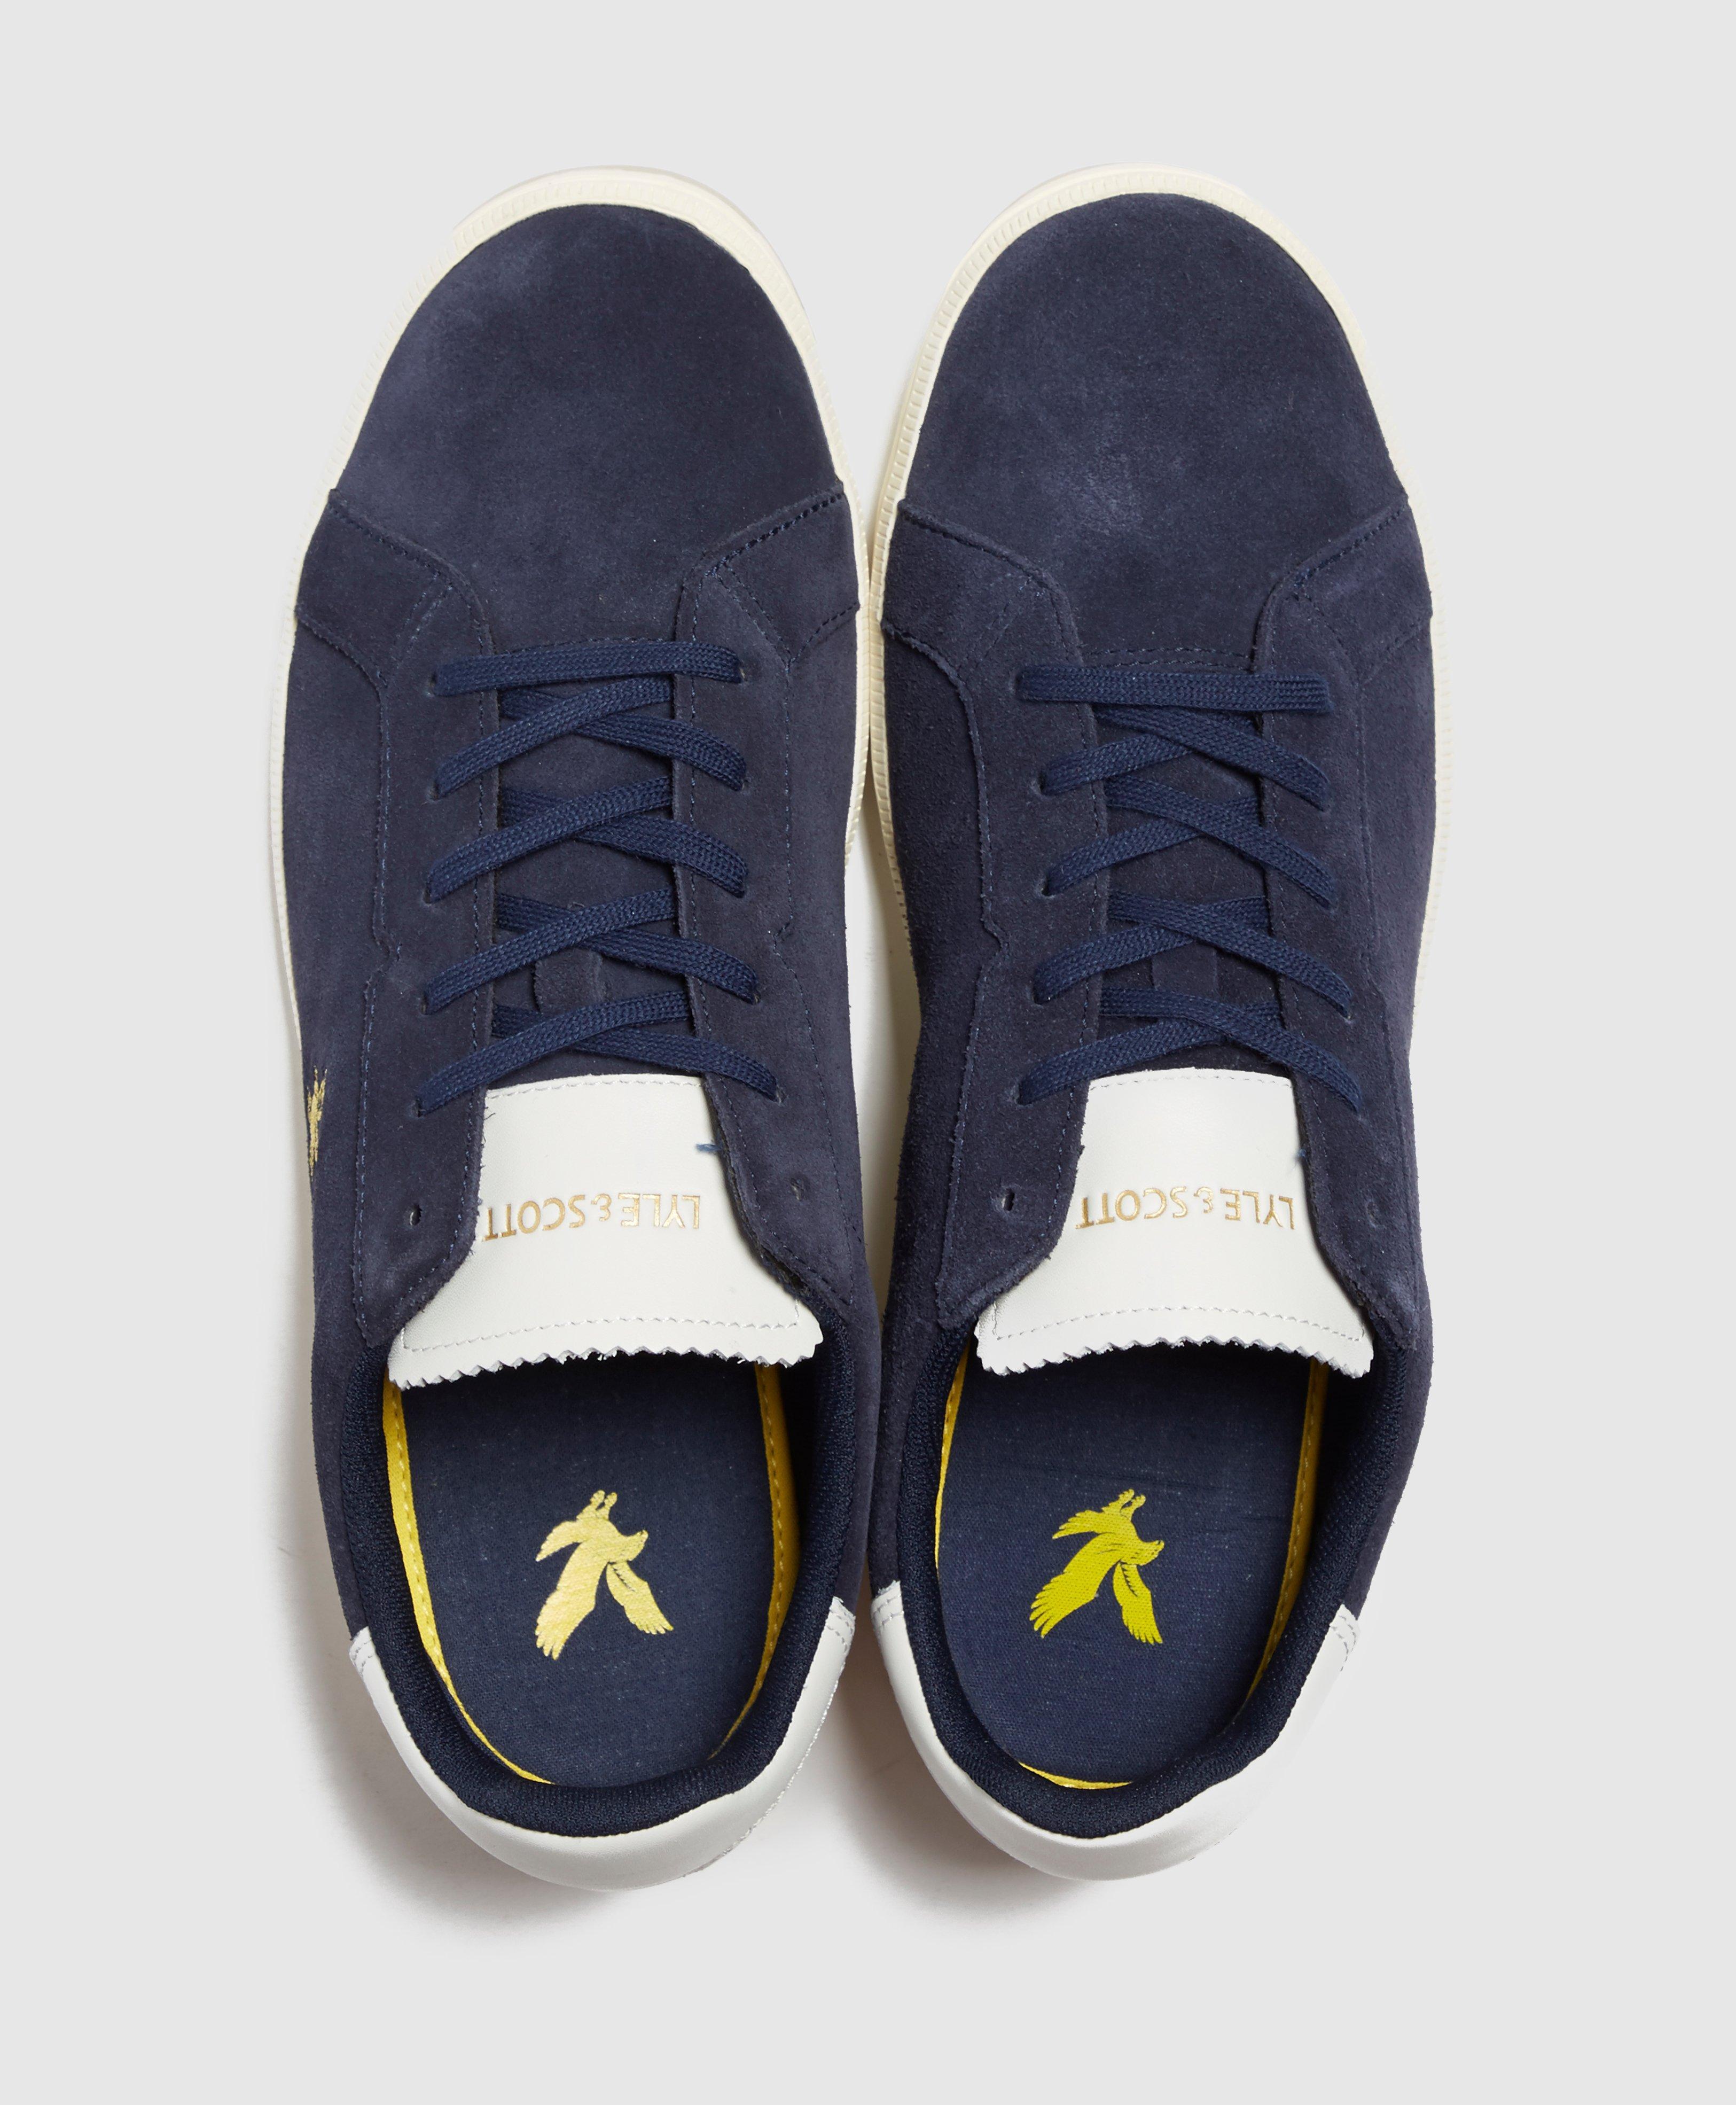 scotts lacoste trainers sale - 50% OFF 